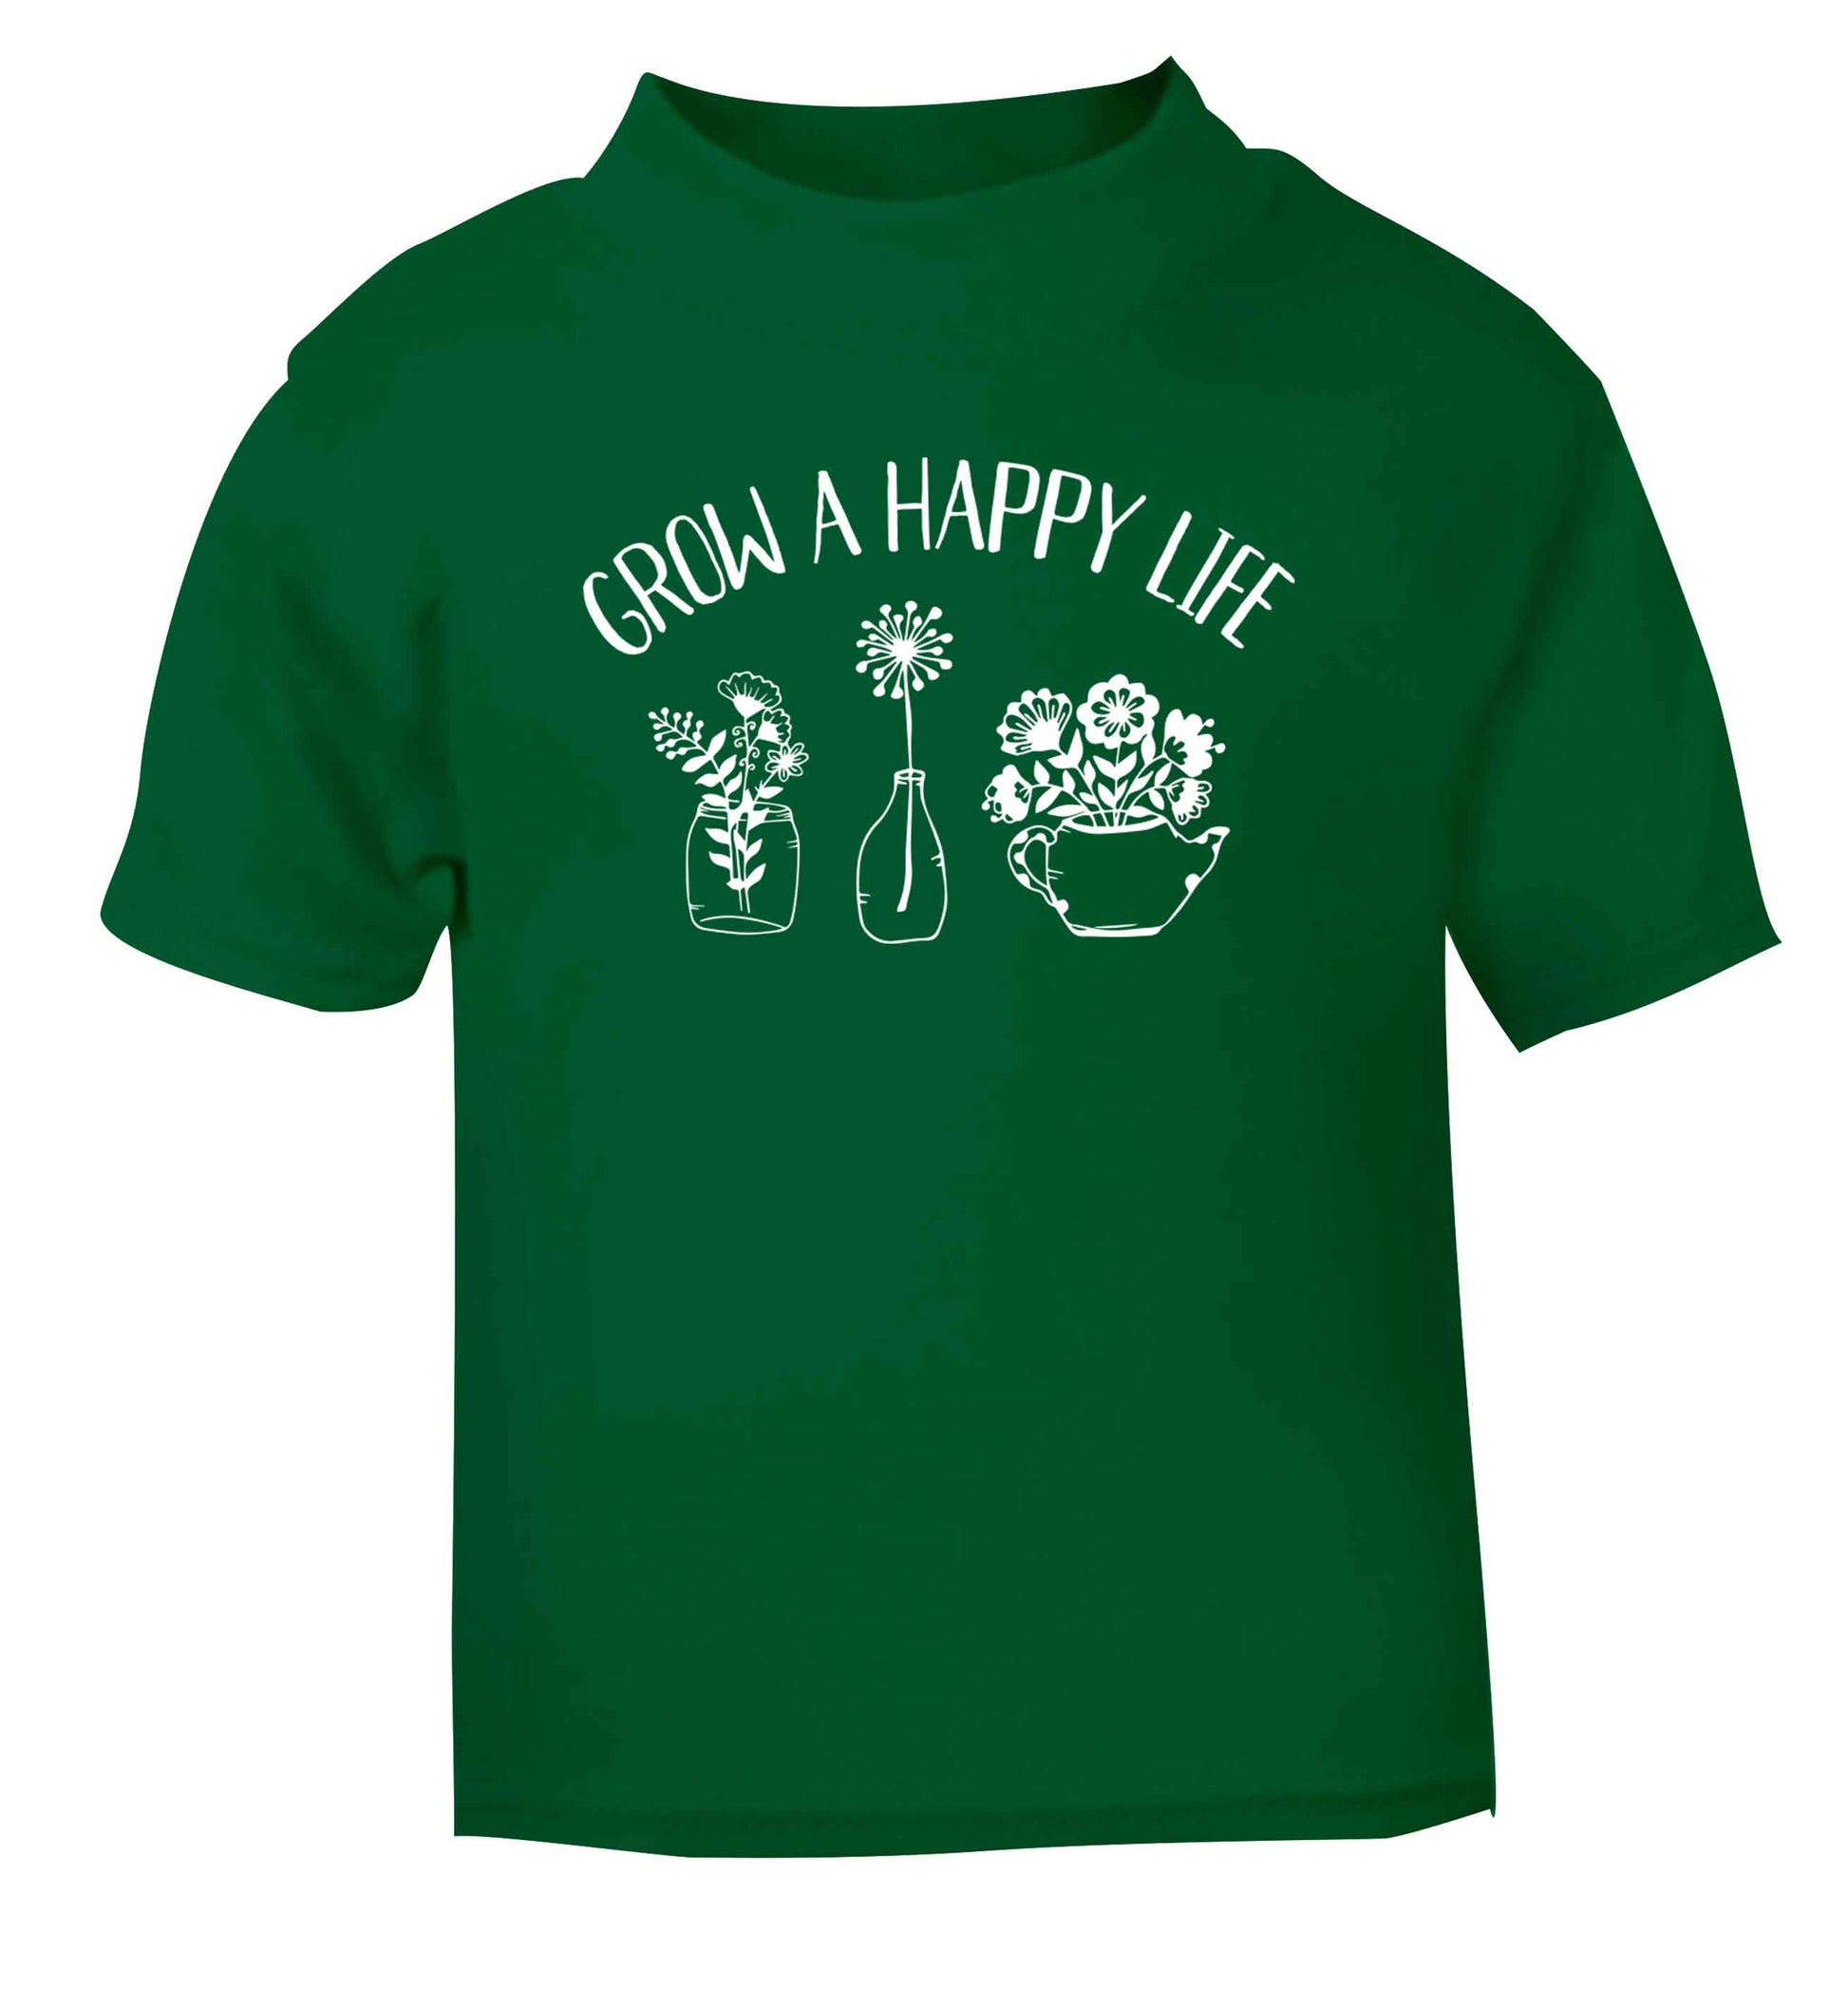 Grow a happy life green Baby Toddler Tshirt 2 Years